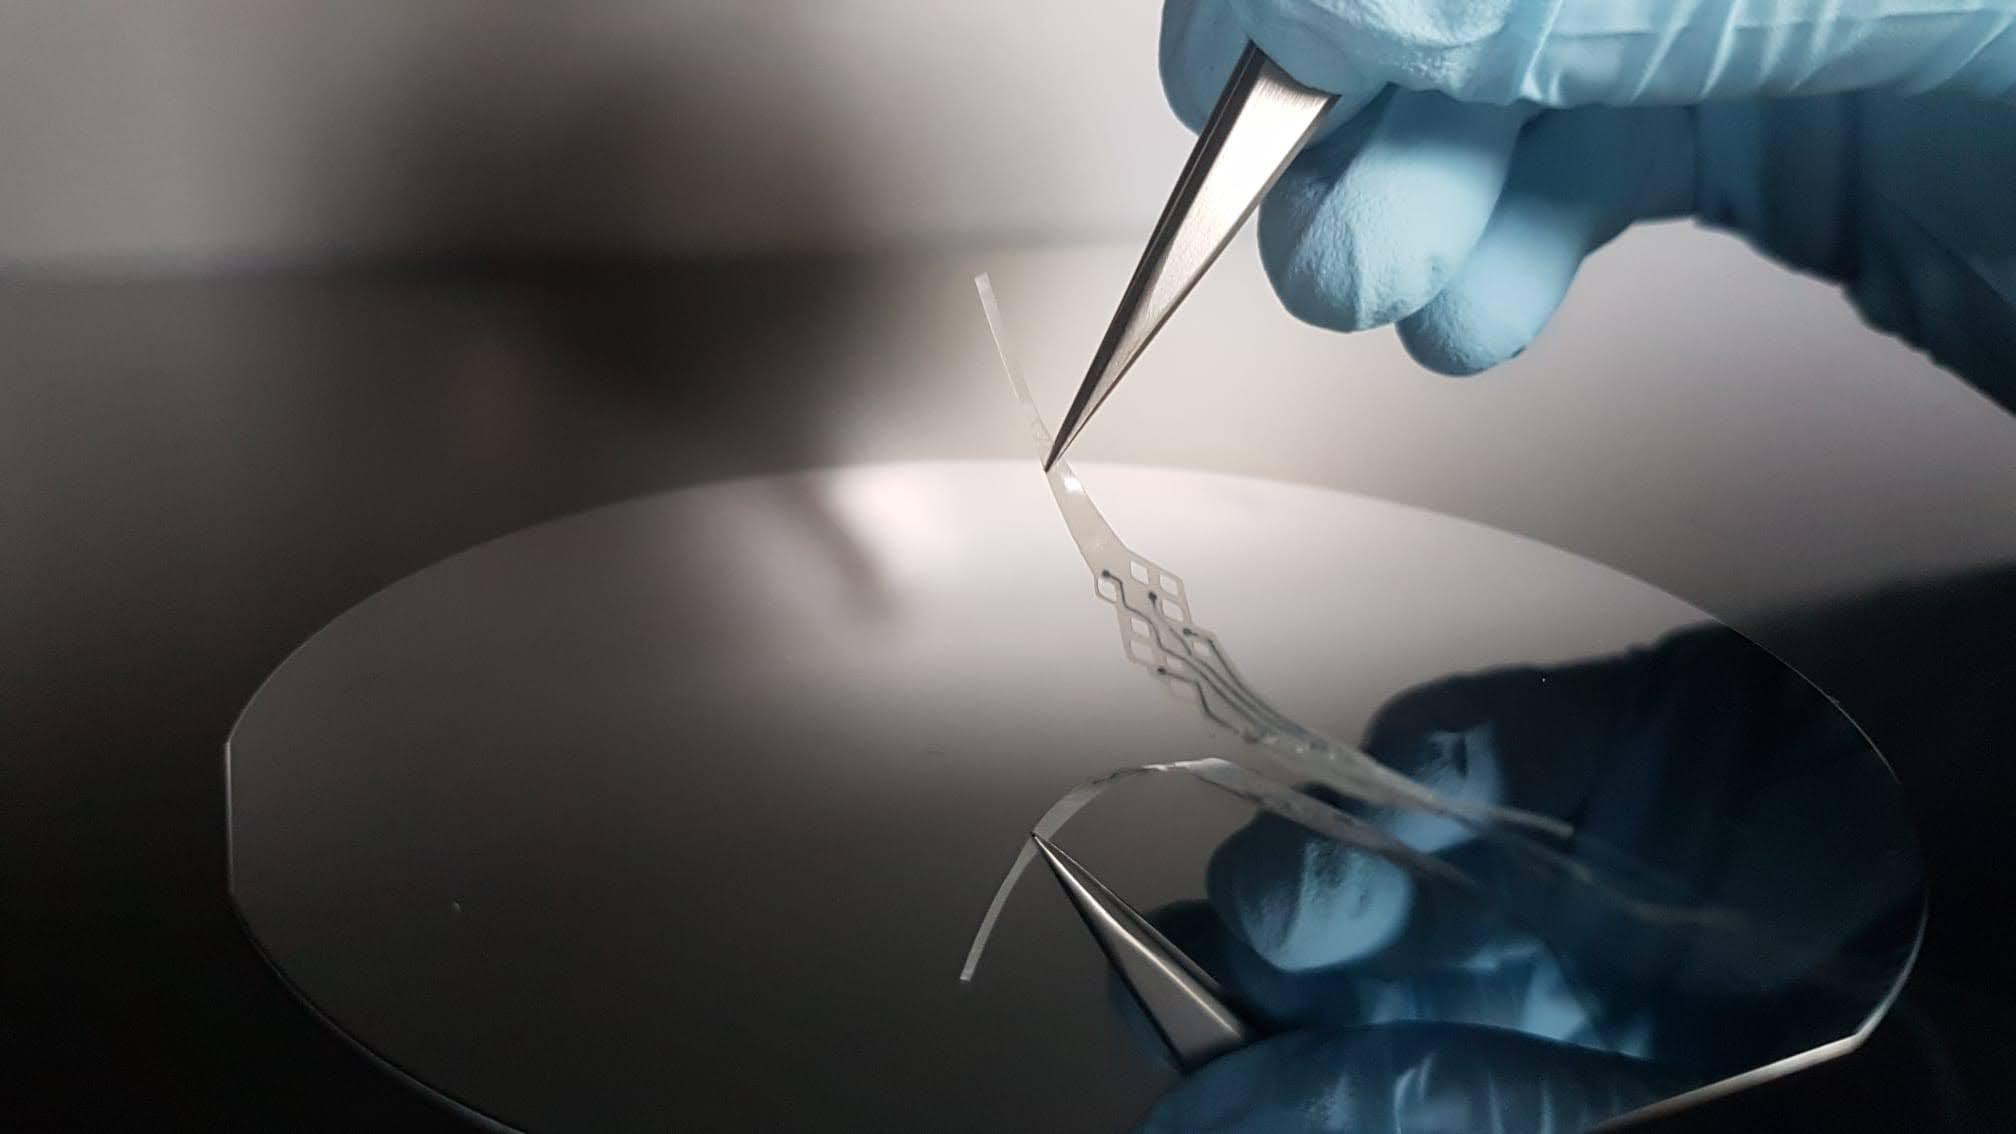 Next-generation implants will be biodegradable and non-invasive - EPFL